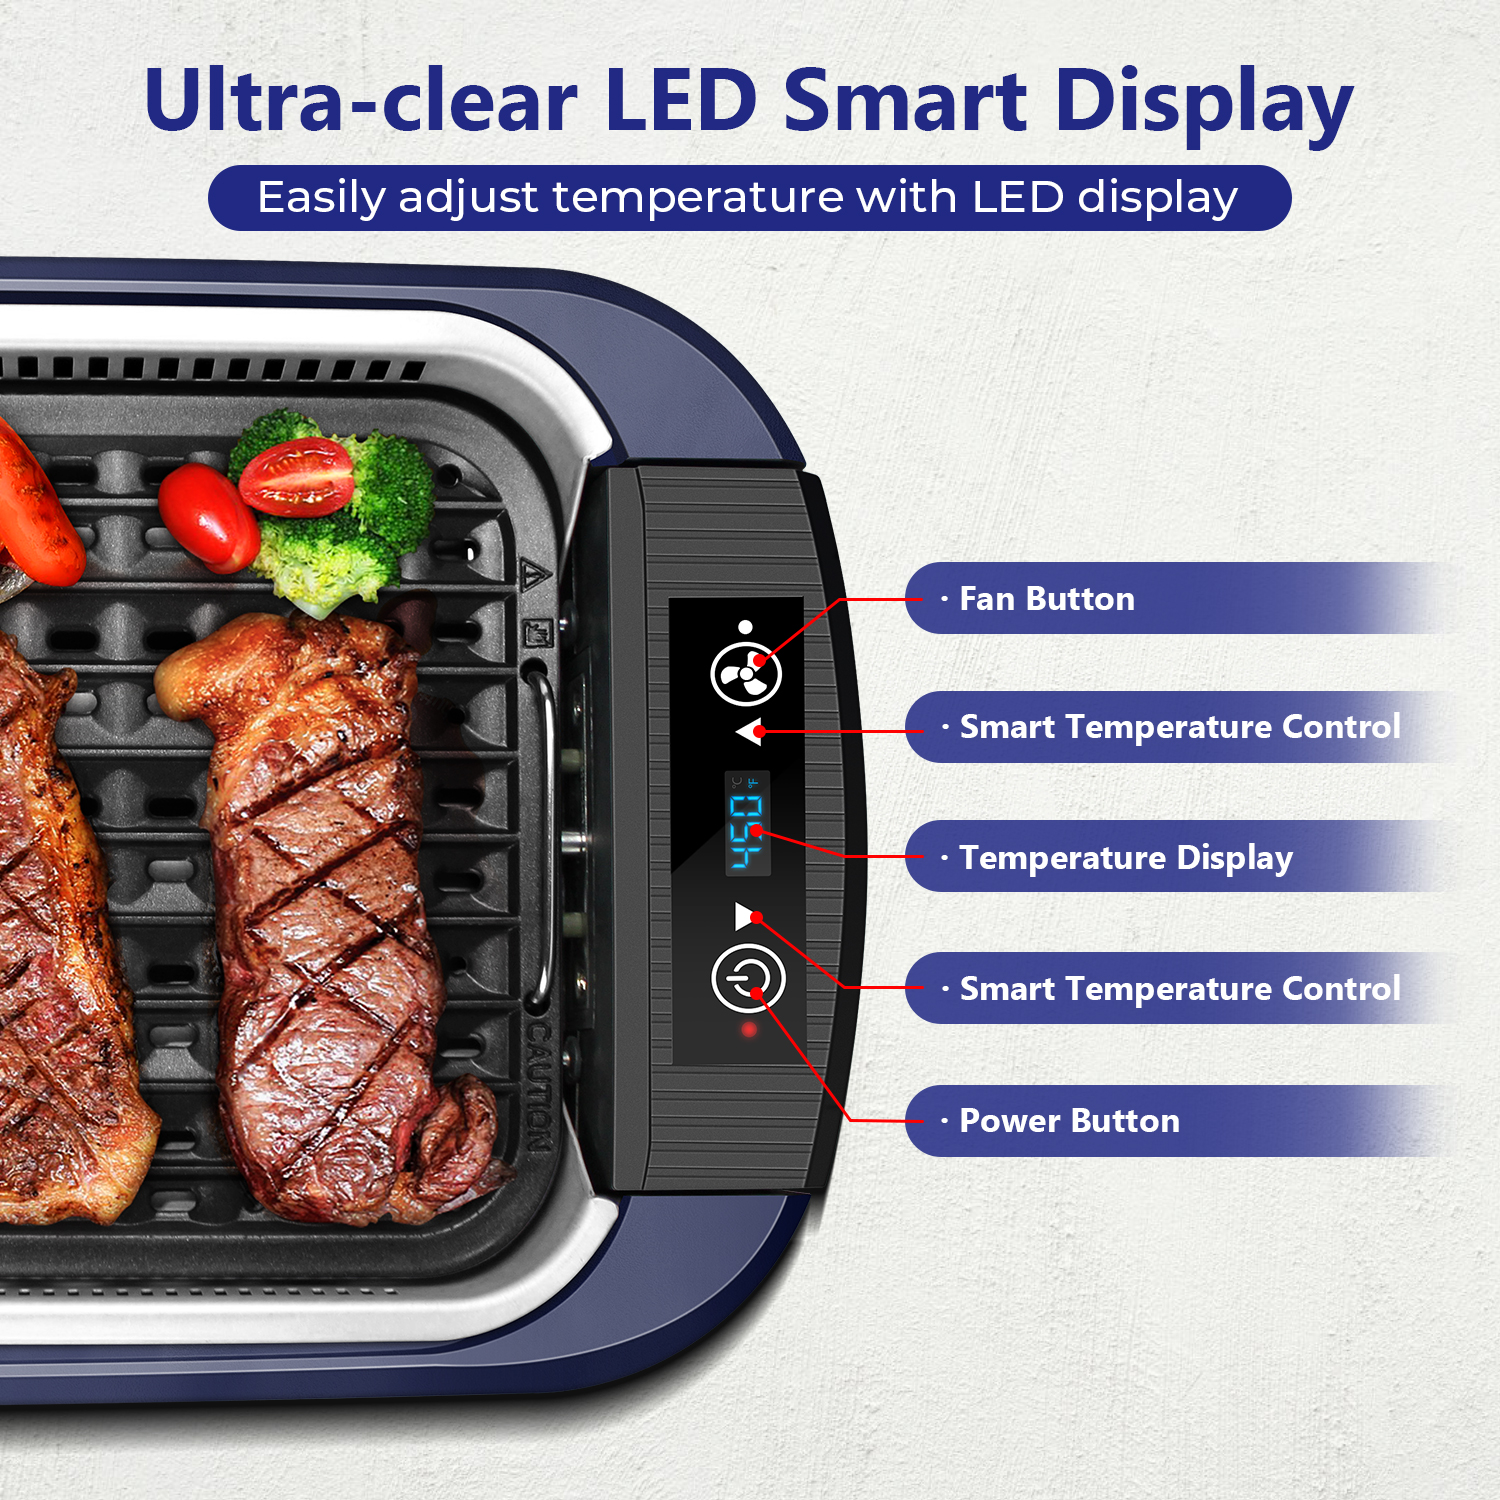 Cusimax Smokeless Indoor Grill Portable Electric Grill With Turbo